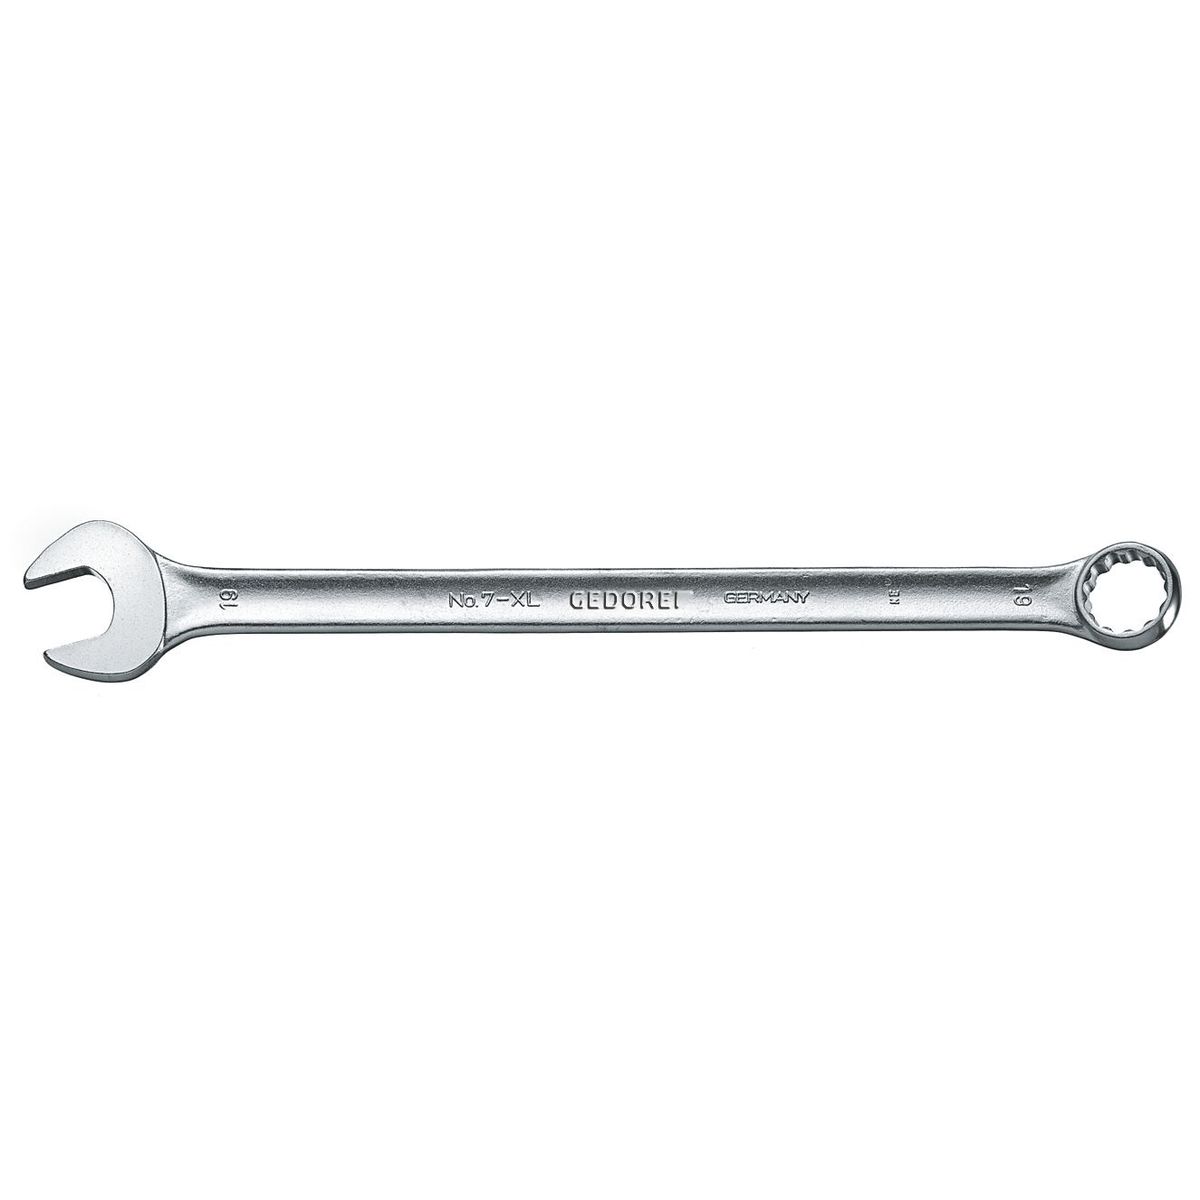 Combination spanner, extra long 30mm No.7 XL 30 Gedore